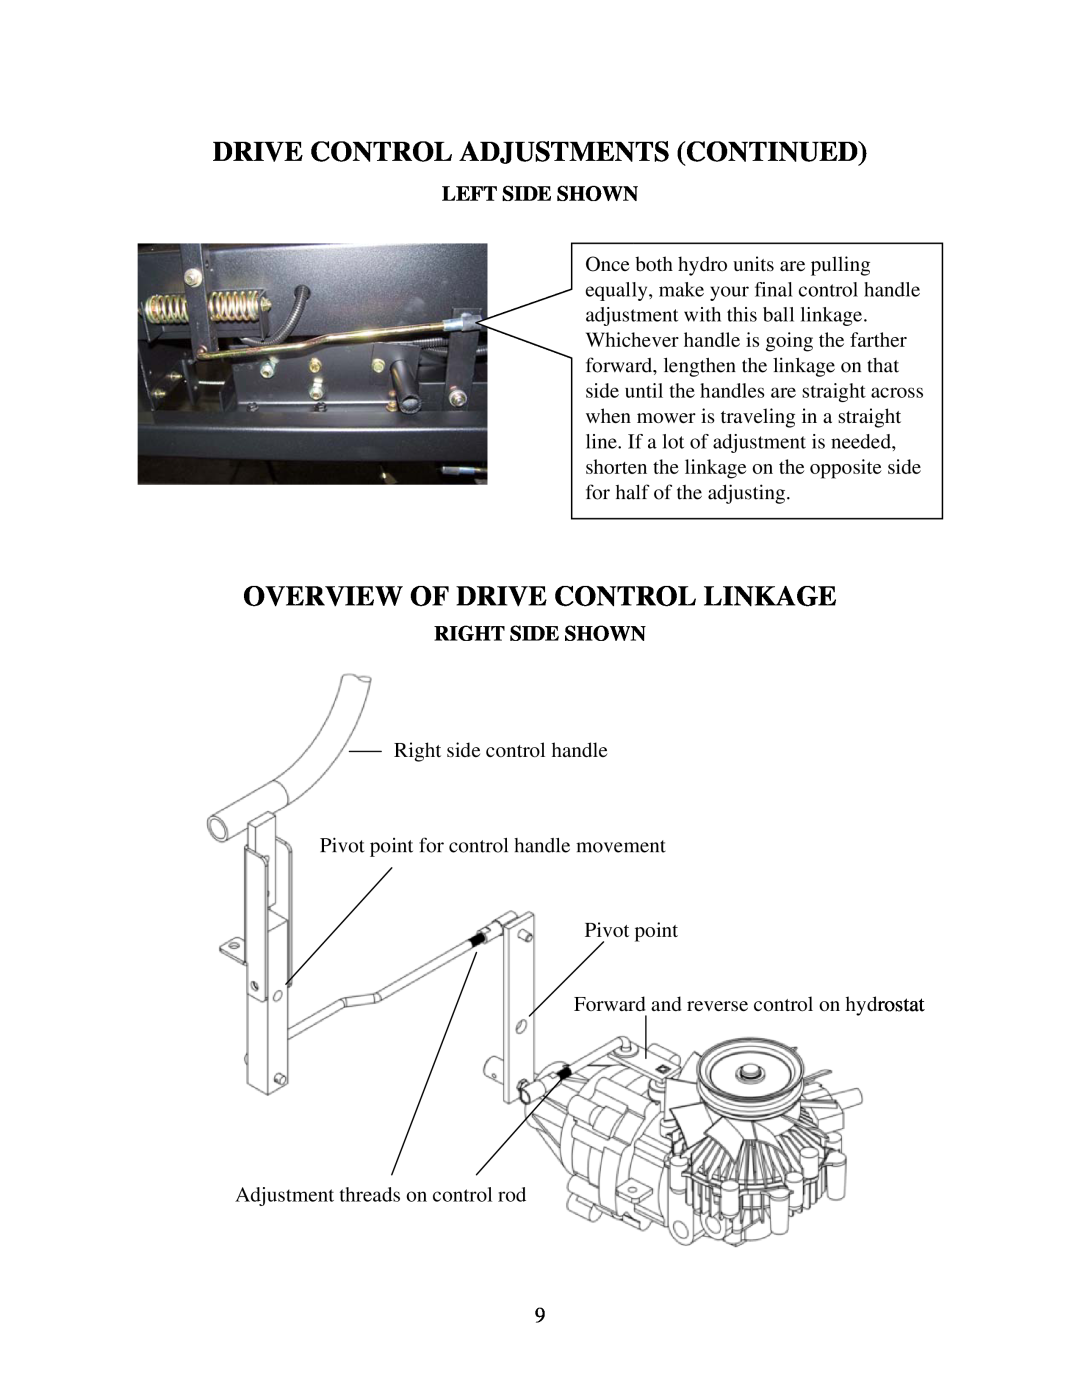 Swisher ZT2560 Drive Control Adjustments Continued, Overview Of Drive Control Linkage, Left Side Shown, Right Side Shown 